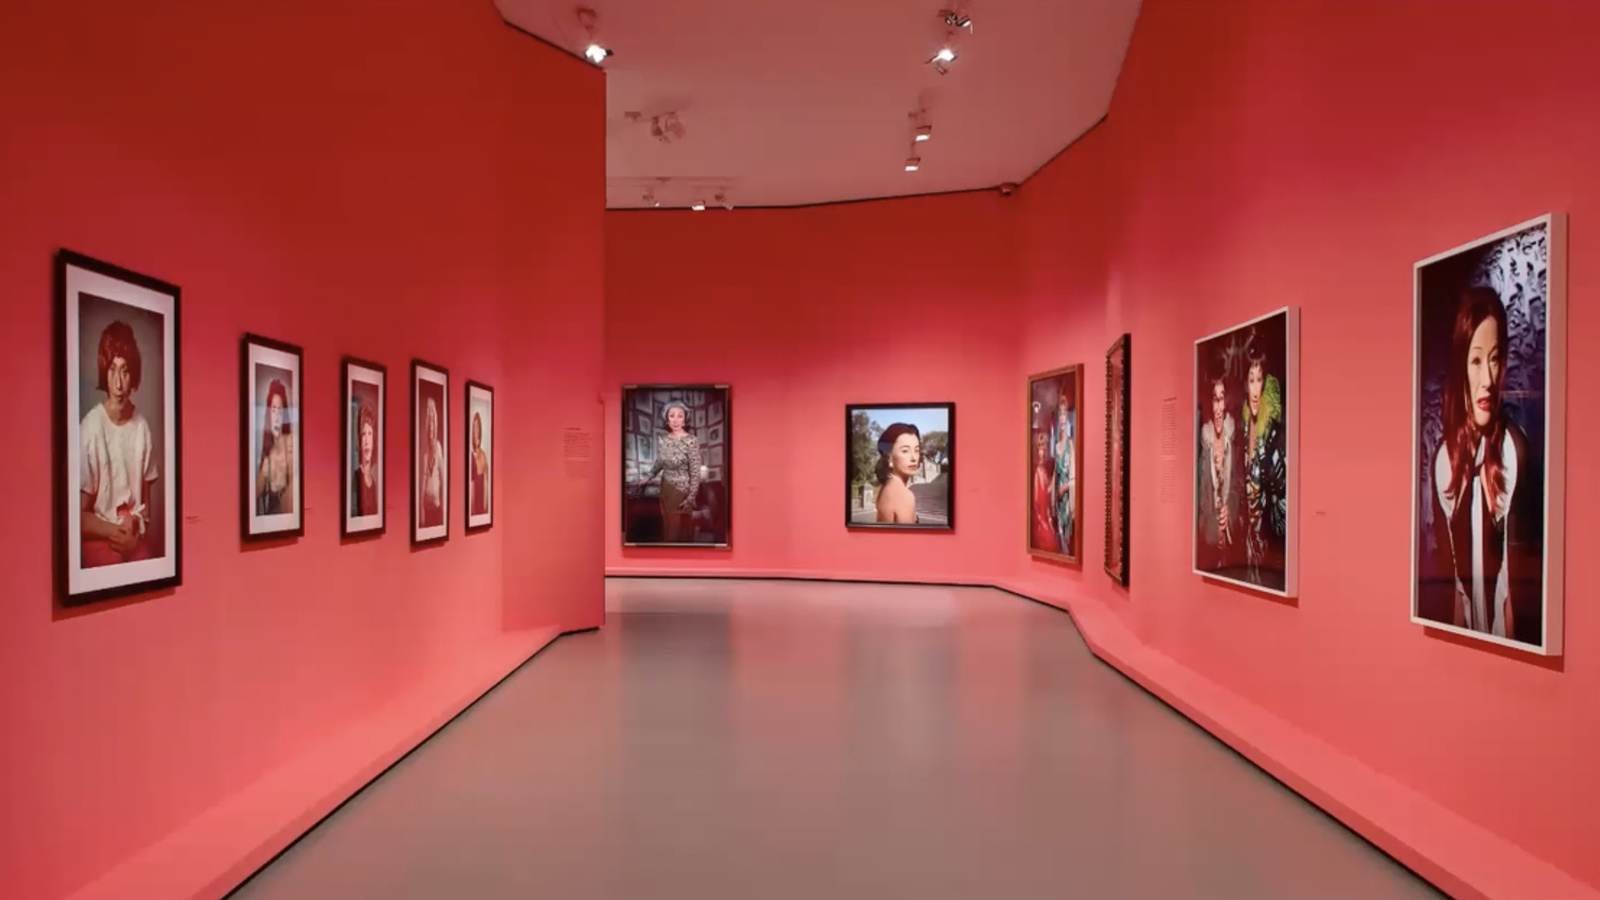 Cindy Sherman, installation view at Fondation Louis Vuitton, 2020.Courtesy of the artist, The Cultivist and Fondation Louis Vuitton.